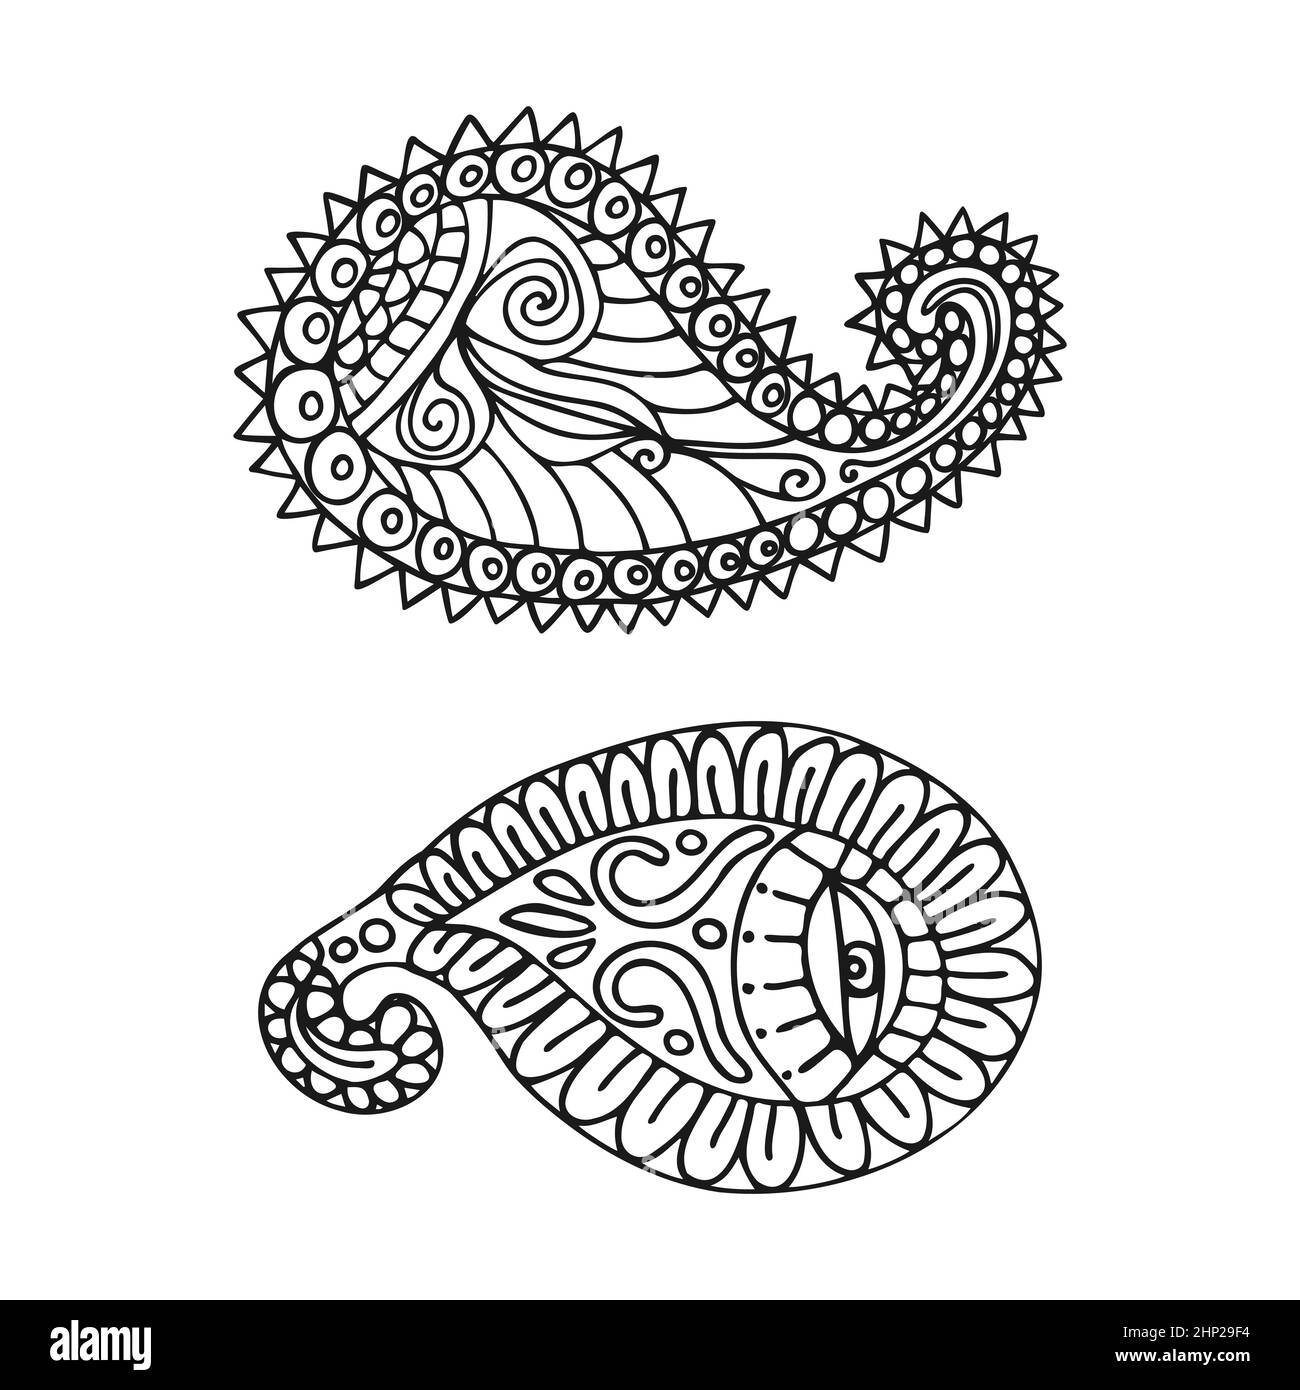 Paisley pattern Cut Out Stock Images & Pictures - Alamy